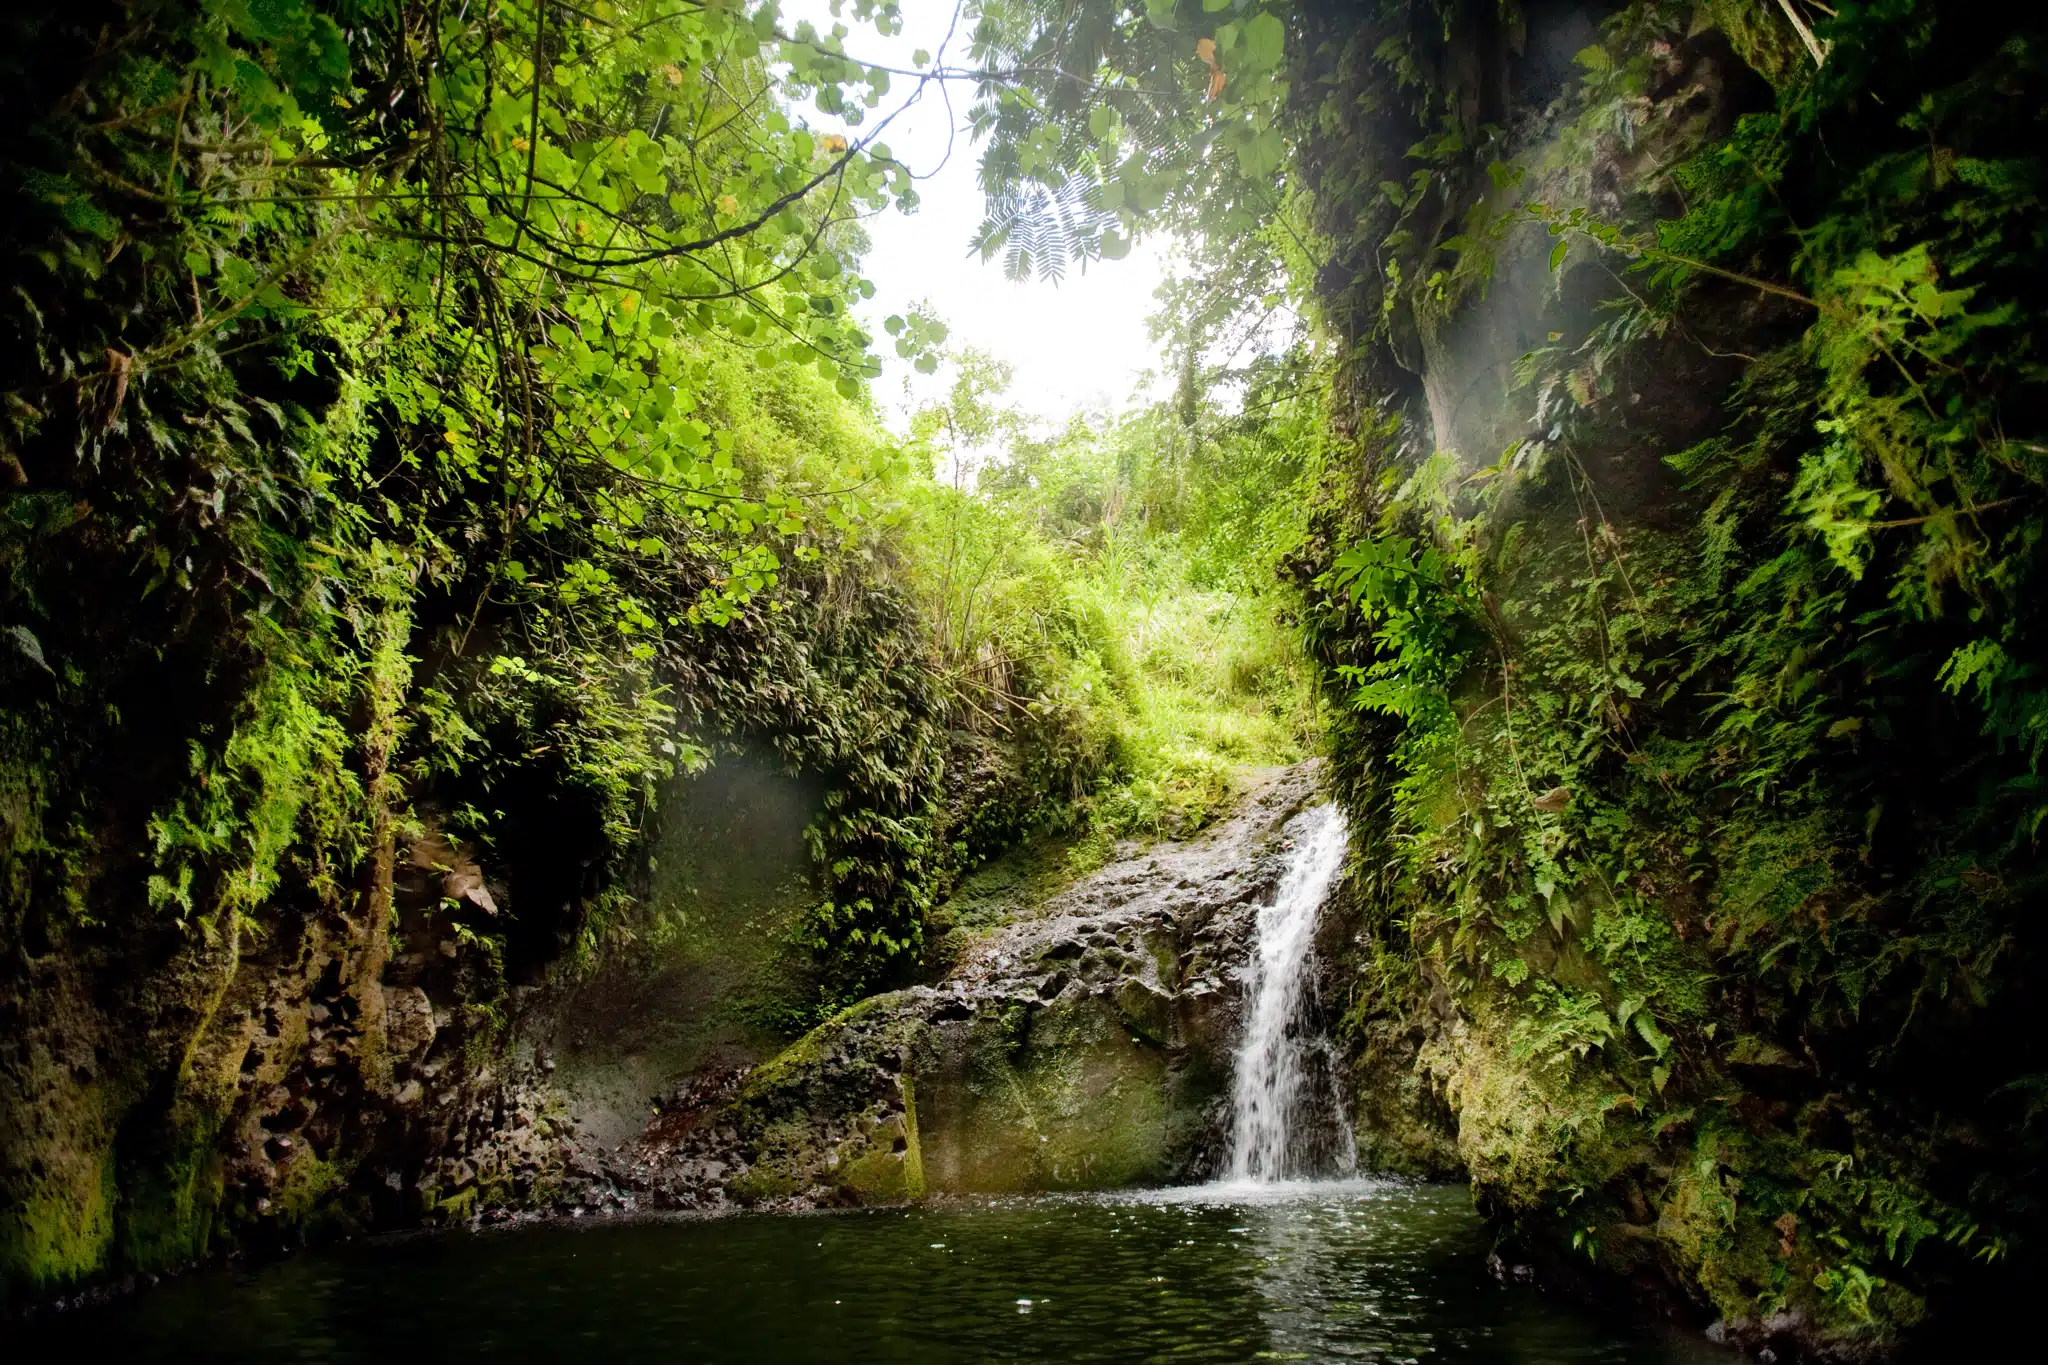 Maunawili Falls is a Waterfall located in the city of Kailua on Oahu, Hawaii